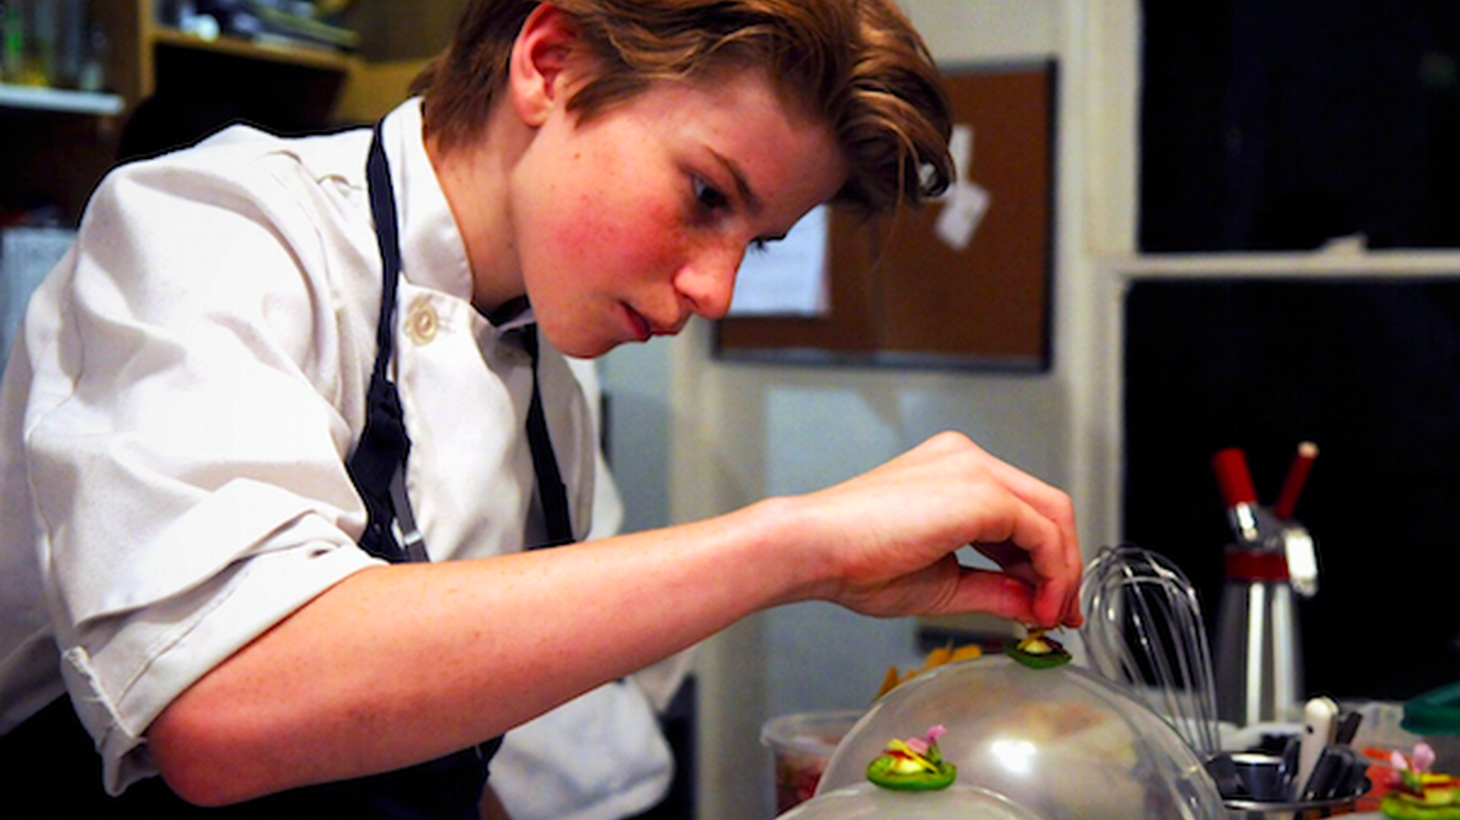 What happens when a prodigy chef realizes his dream, at 19?